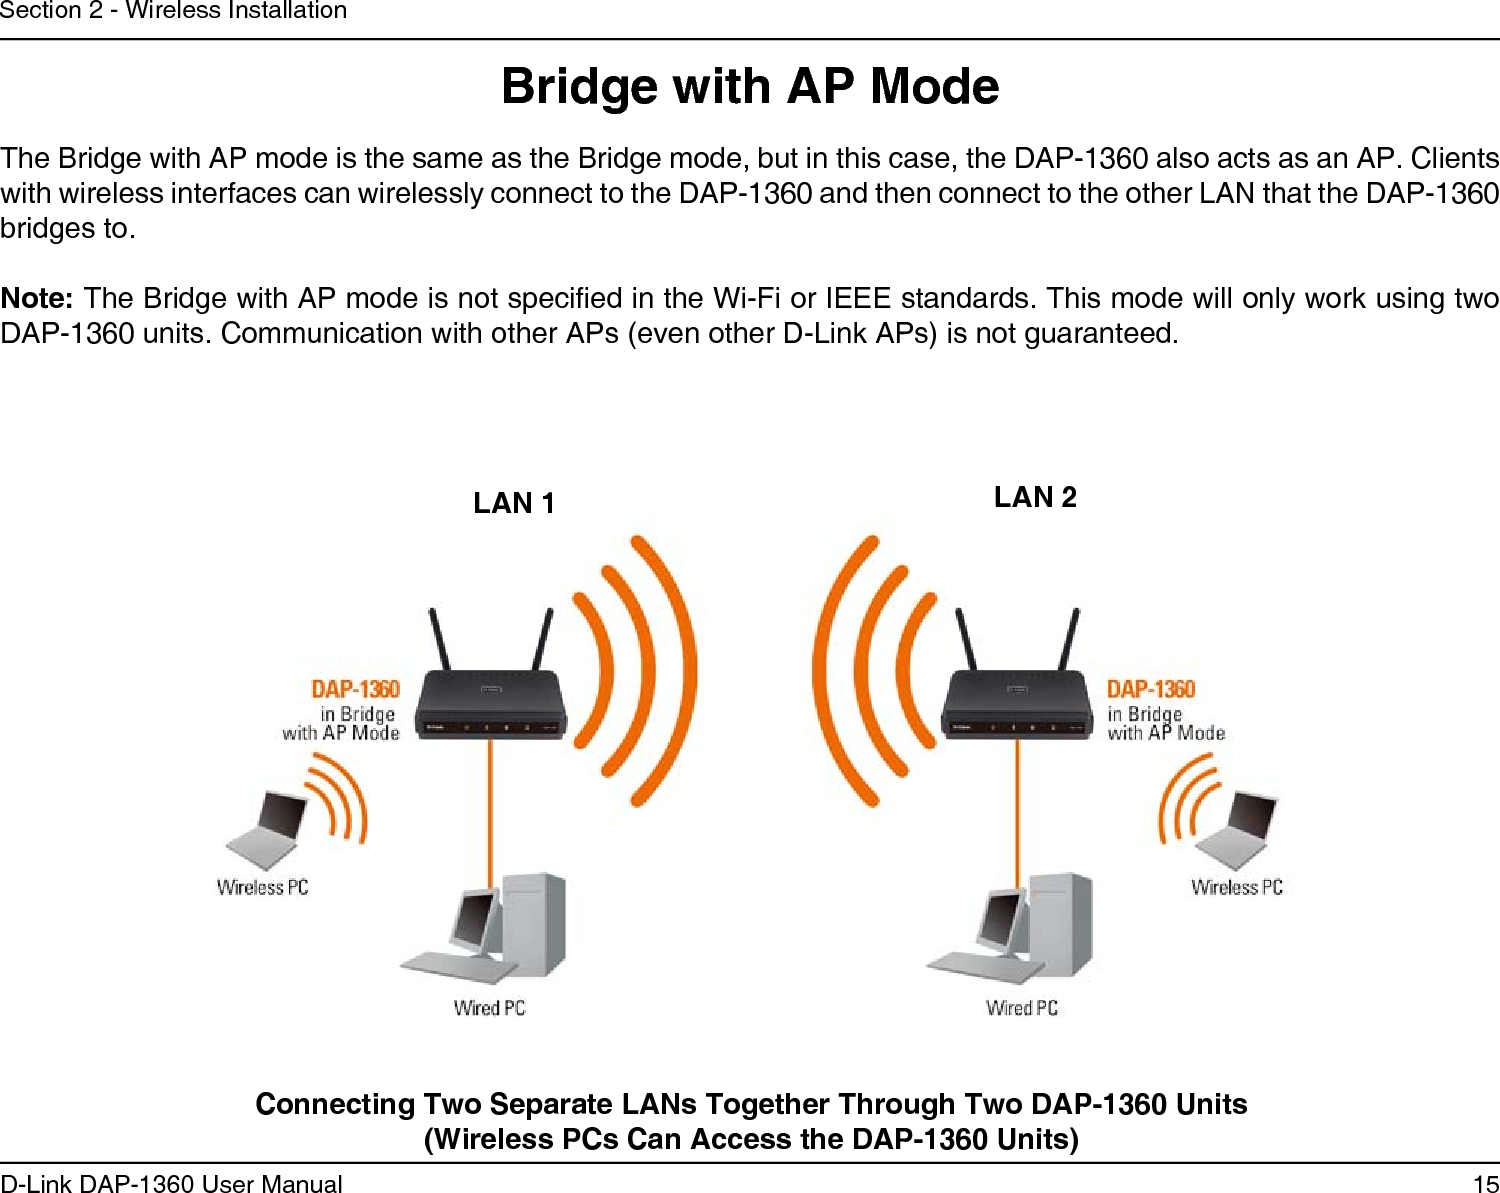 15D-Link DAP-1360 User ManualSection 2 - Wireless InstallationBridge with AP ModeThe Bridge with AP mode is the same as the Bridge mode, but in this case, the DAP-1360 also acts as an AP. Clients with wireless interfaces can wirelessly connect to the DAP-1360 and then connect to the other LAN that the DAP-1360 bridges to. Note: The Bridge with AP mode is not specied in the Wi-Fi or IEEE standards. This mode will only work using two DAP-1360 units. Communication with other APs (even other D-Link APs) is not guaranteed.Connecting Two Separate LANs Together Through Two DAP-1360 Units (Wireless PCs Can Access the DAP-1360 Units)LAN 1 LAN 2